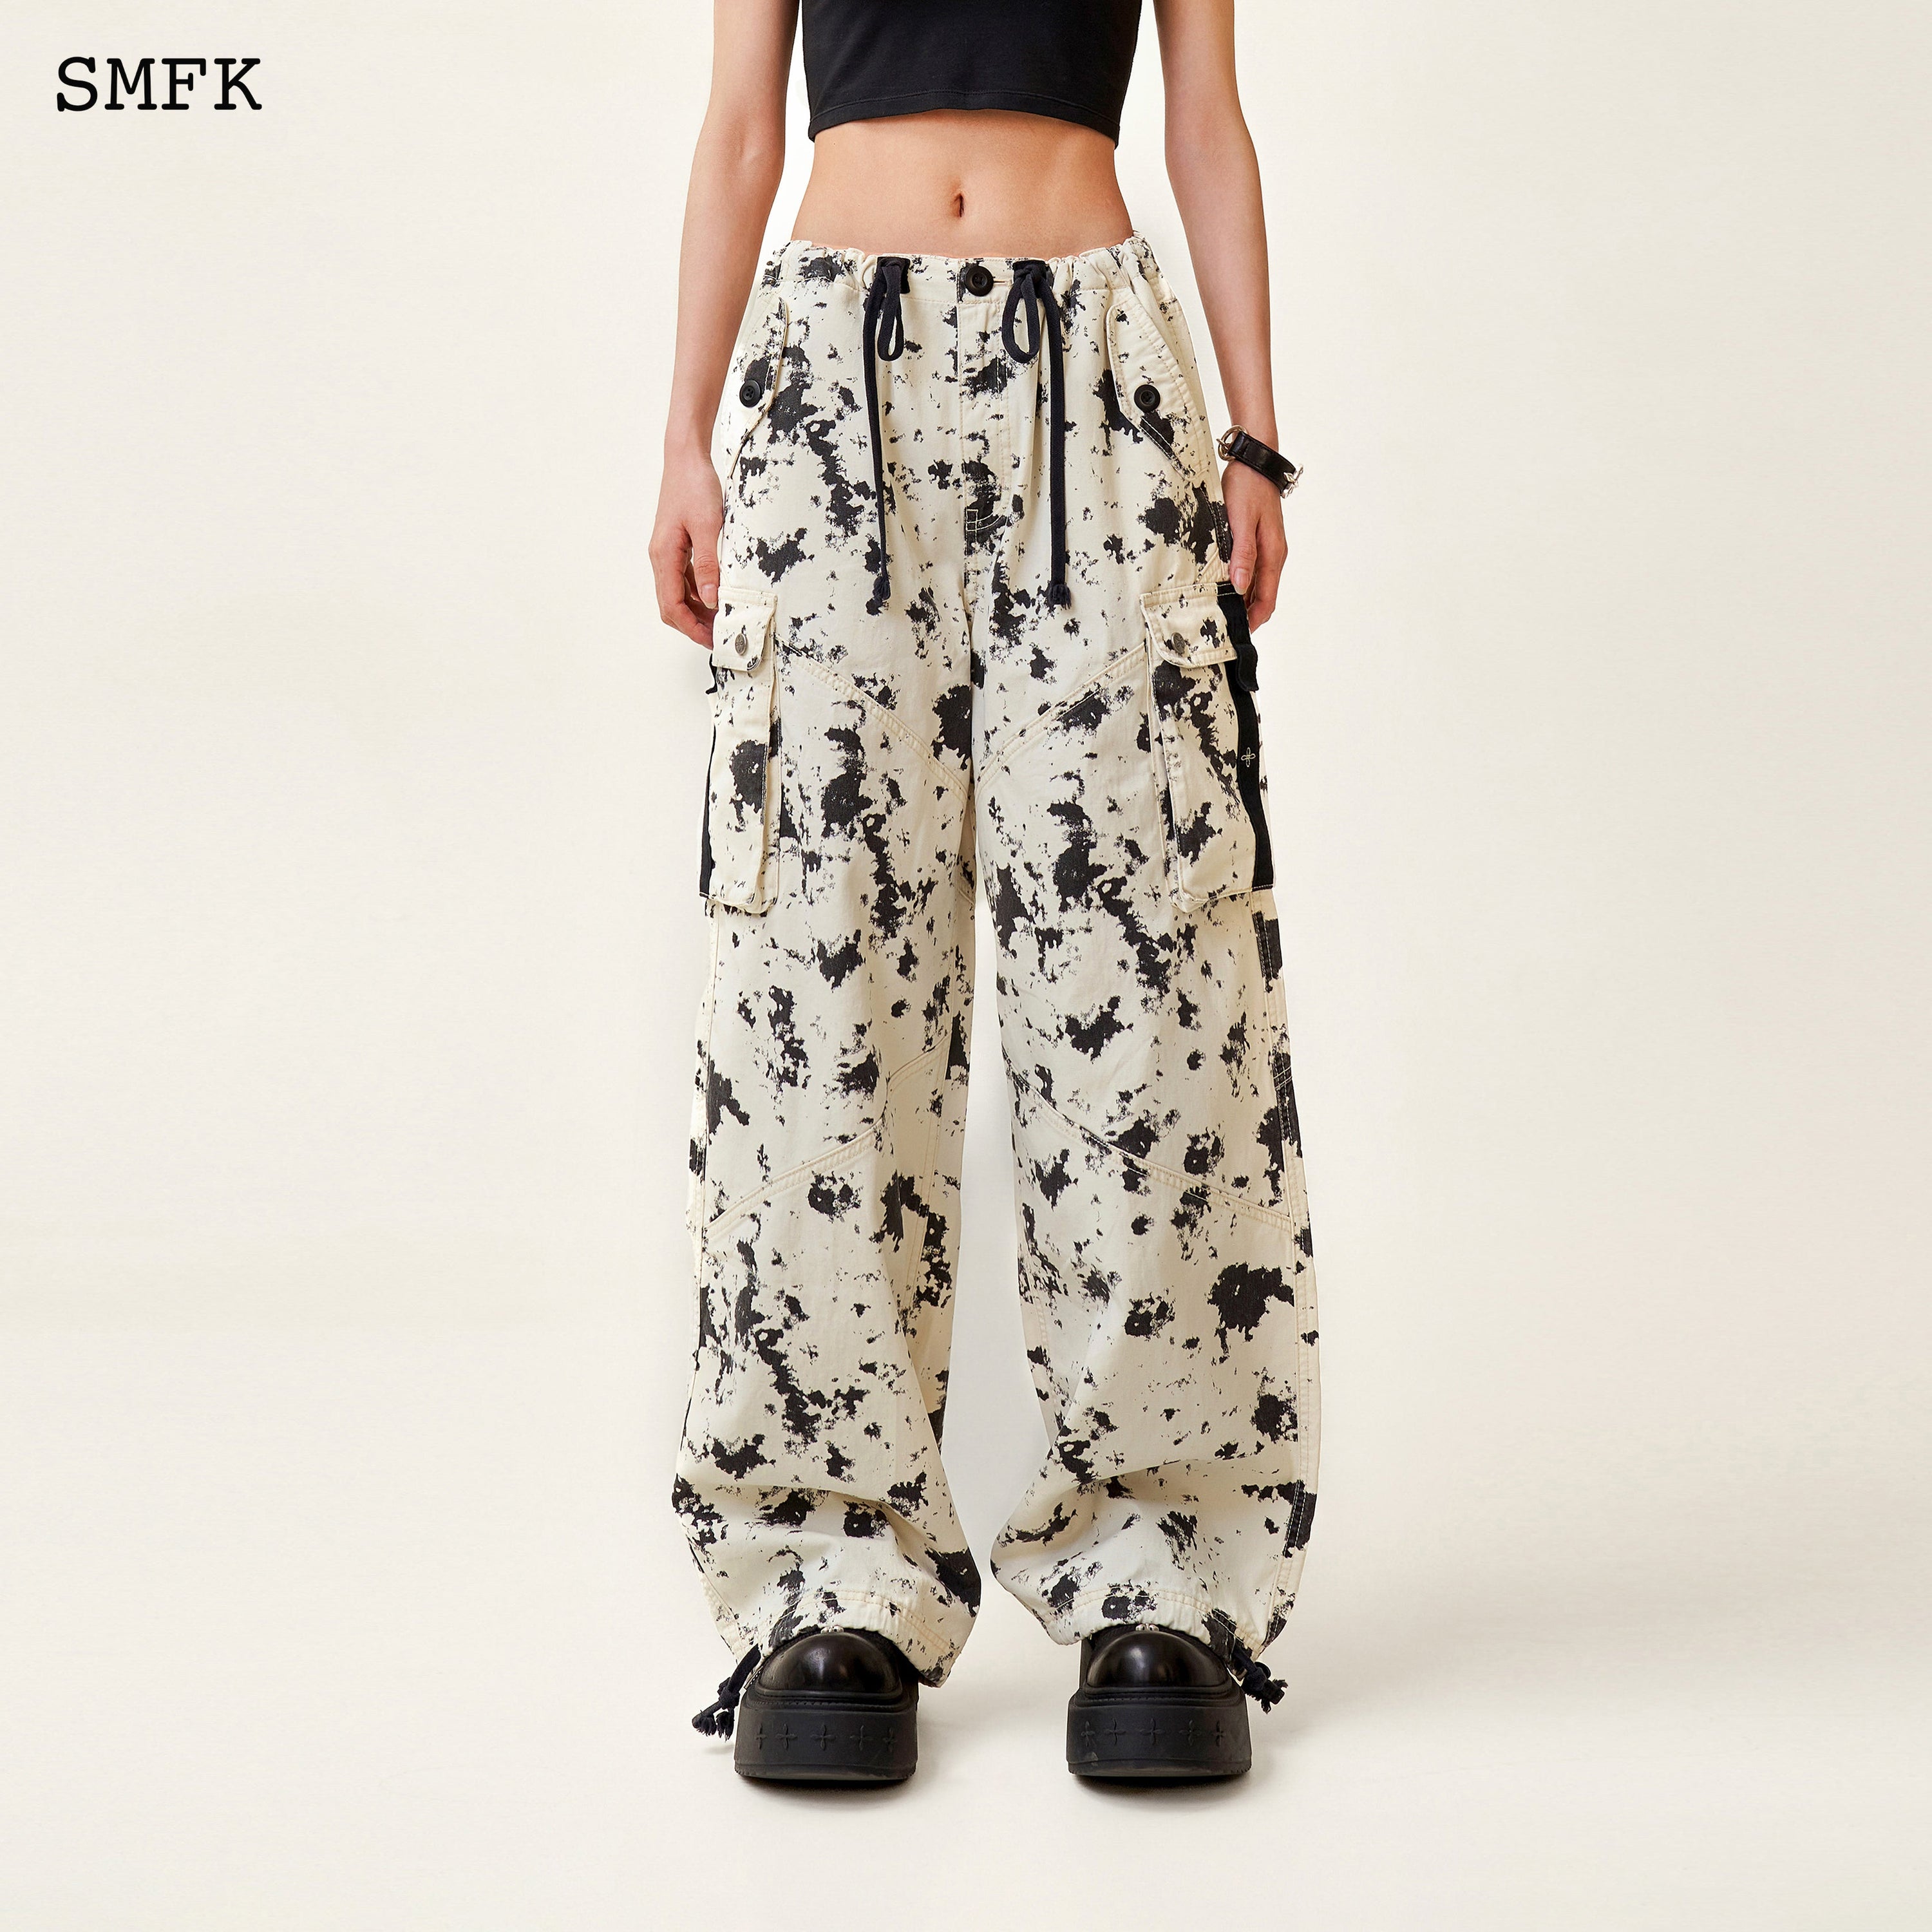 Compass White Camouflage Retro Paratrooper Pants - SMFK Official